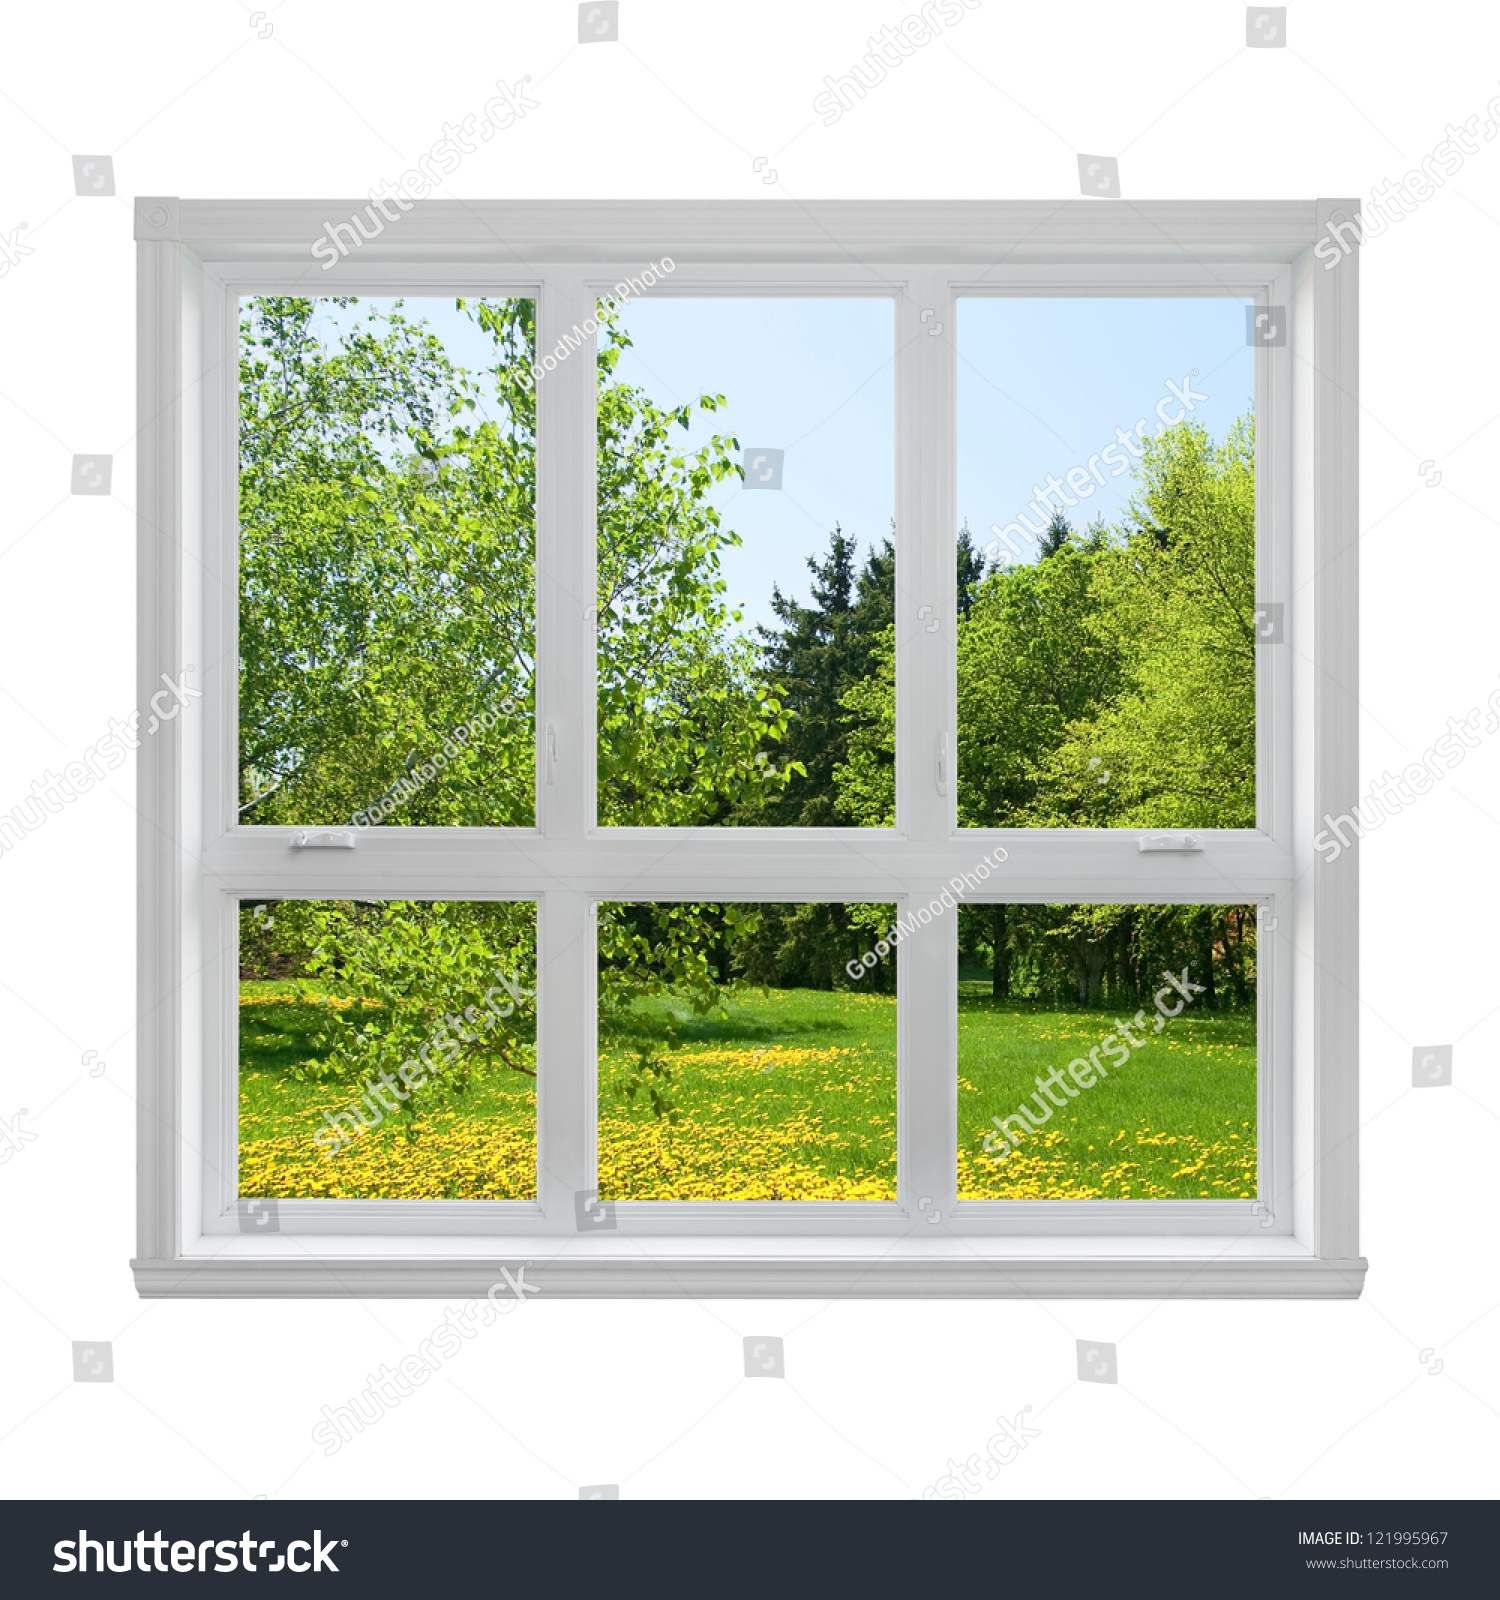 Spring dandelion lawn and green trees seen through the window. #121995967